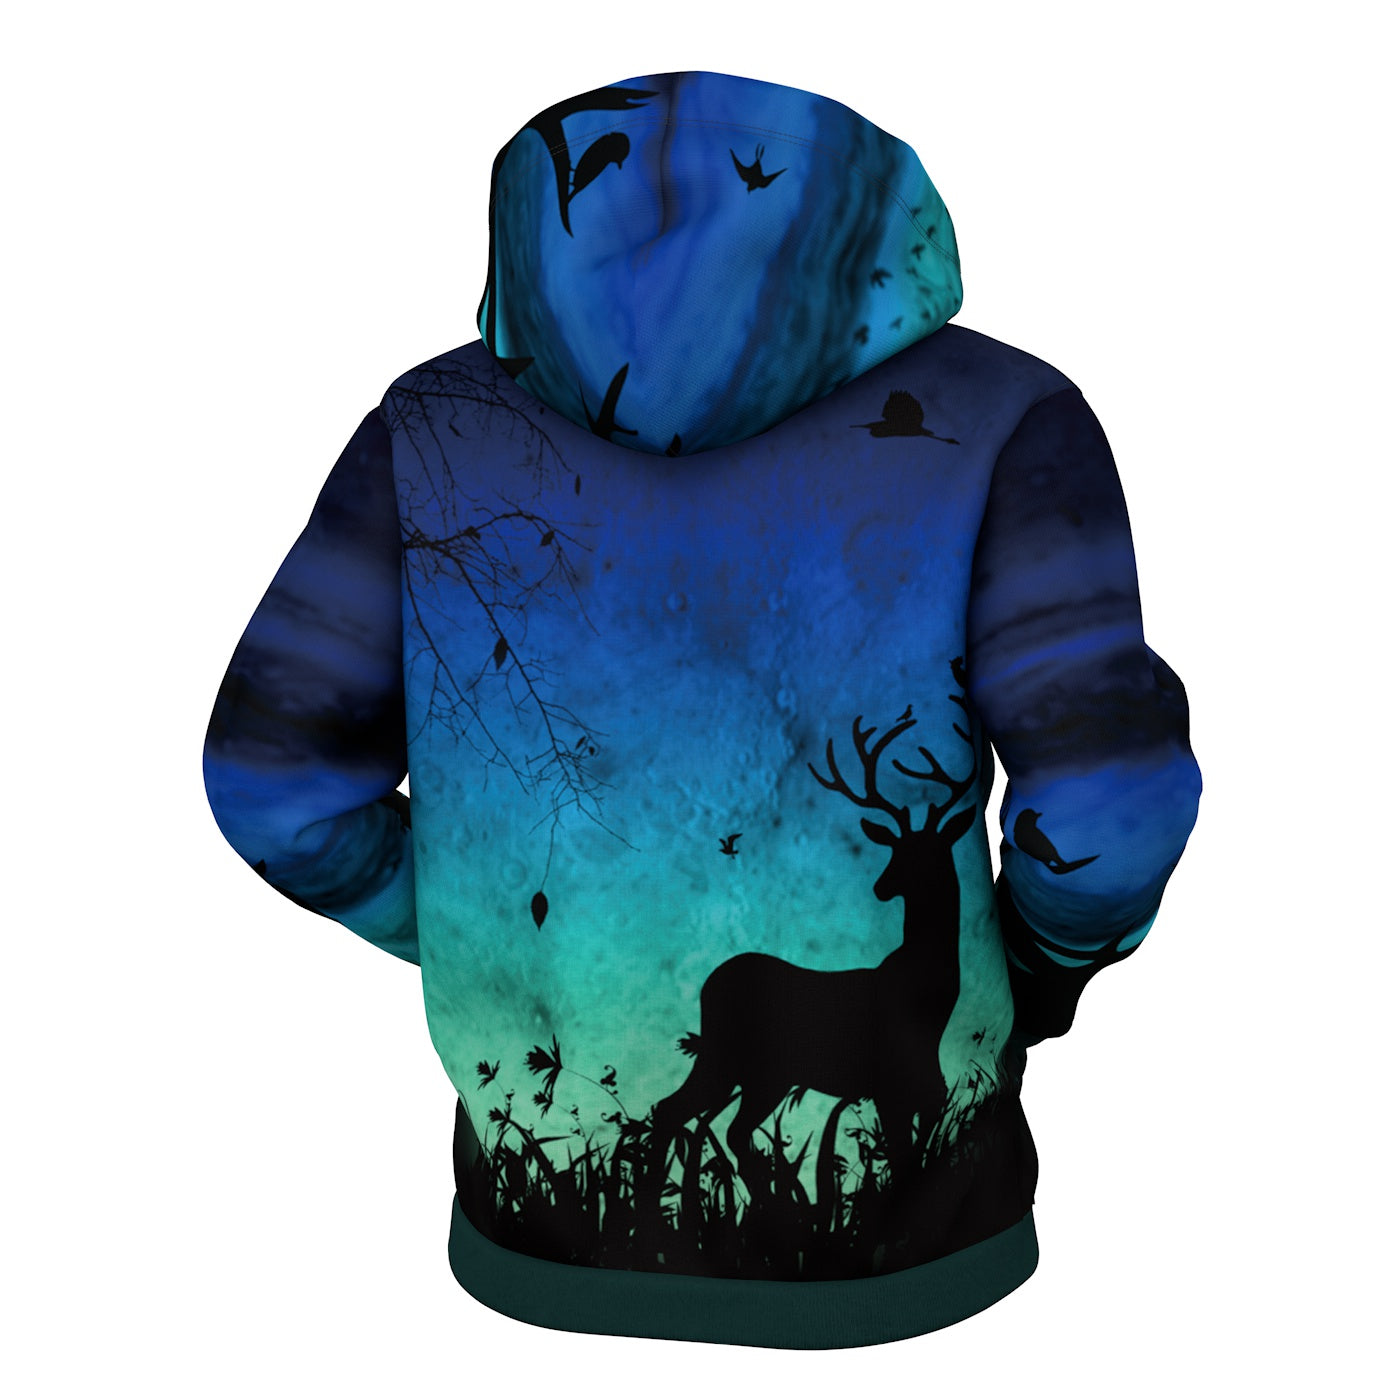 Magical Moment Zip Up Hoodie